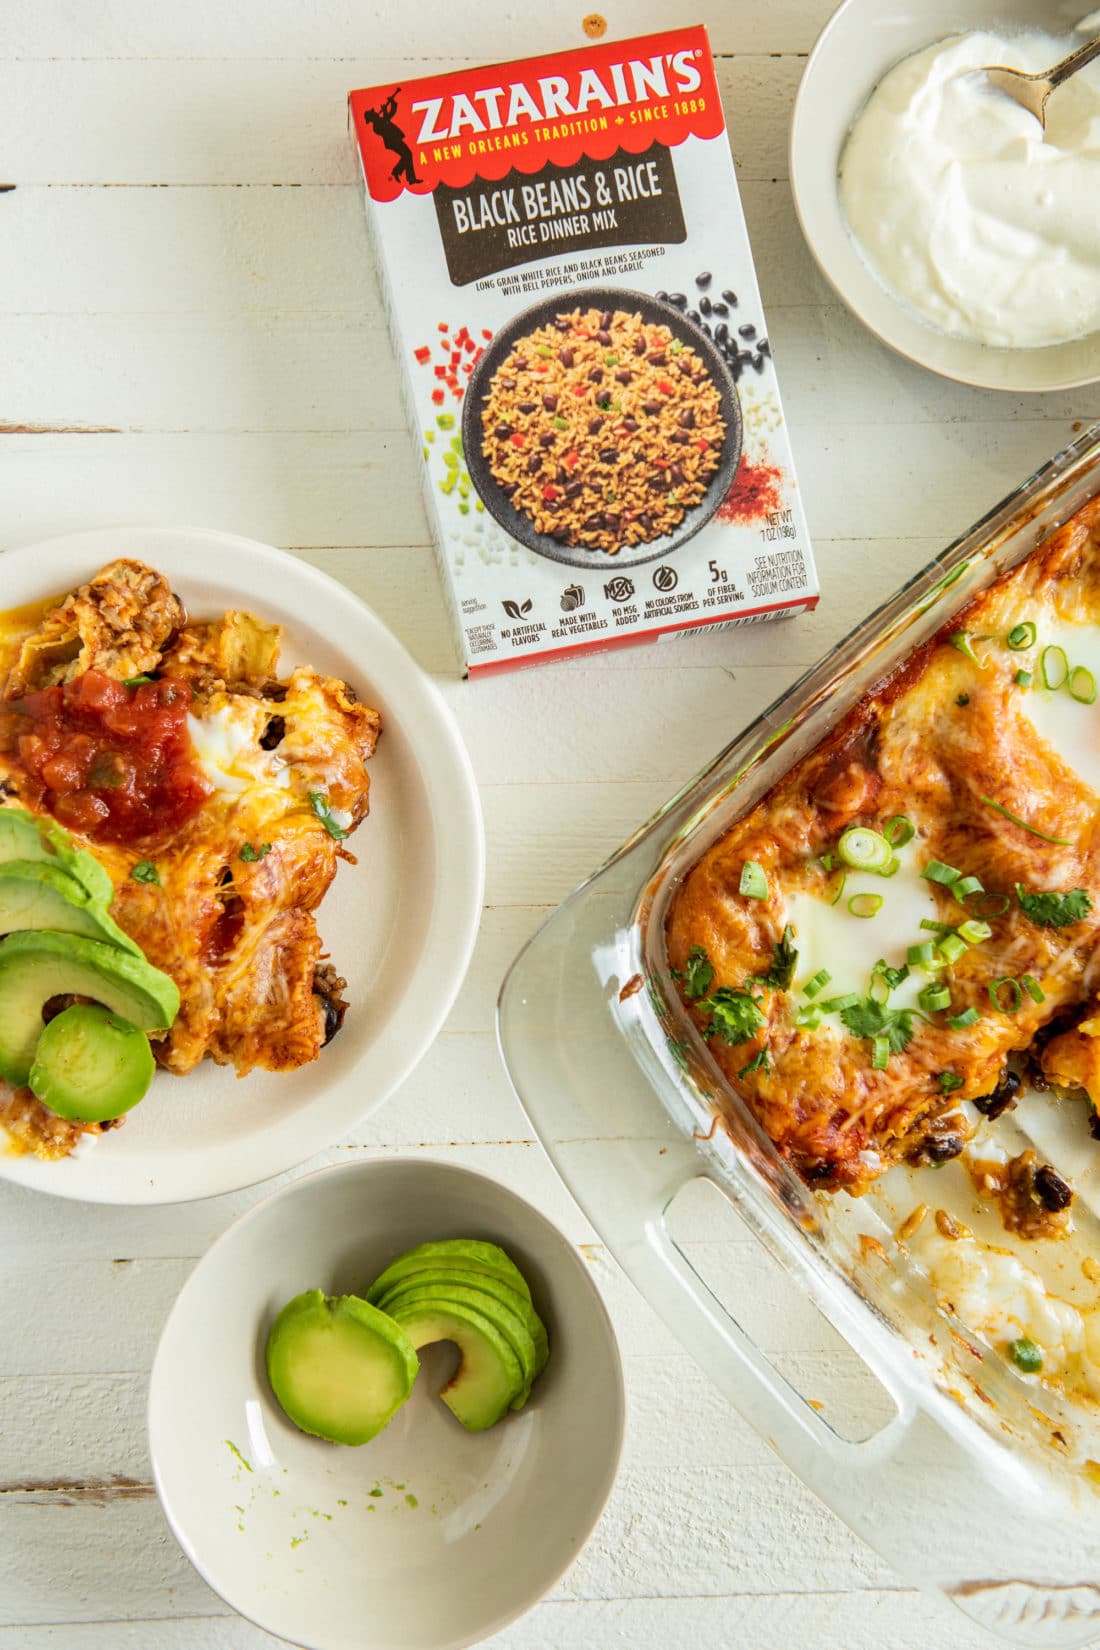 Huevos Rancheros Breakfast Casserole on a plate and in a baking dish.